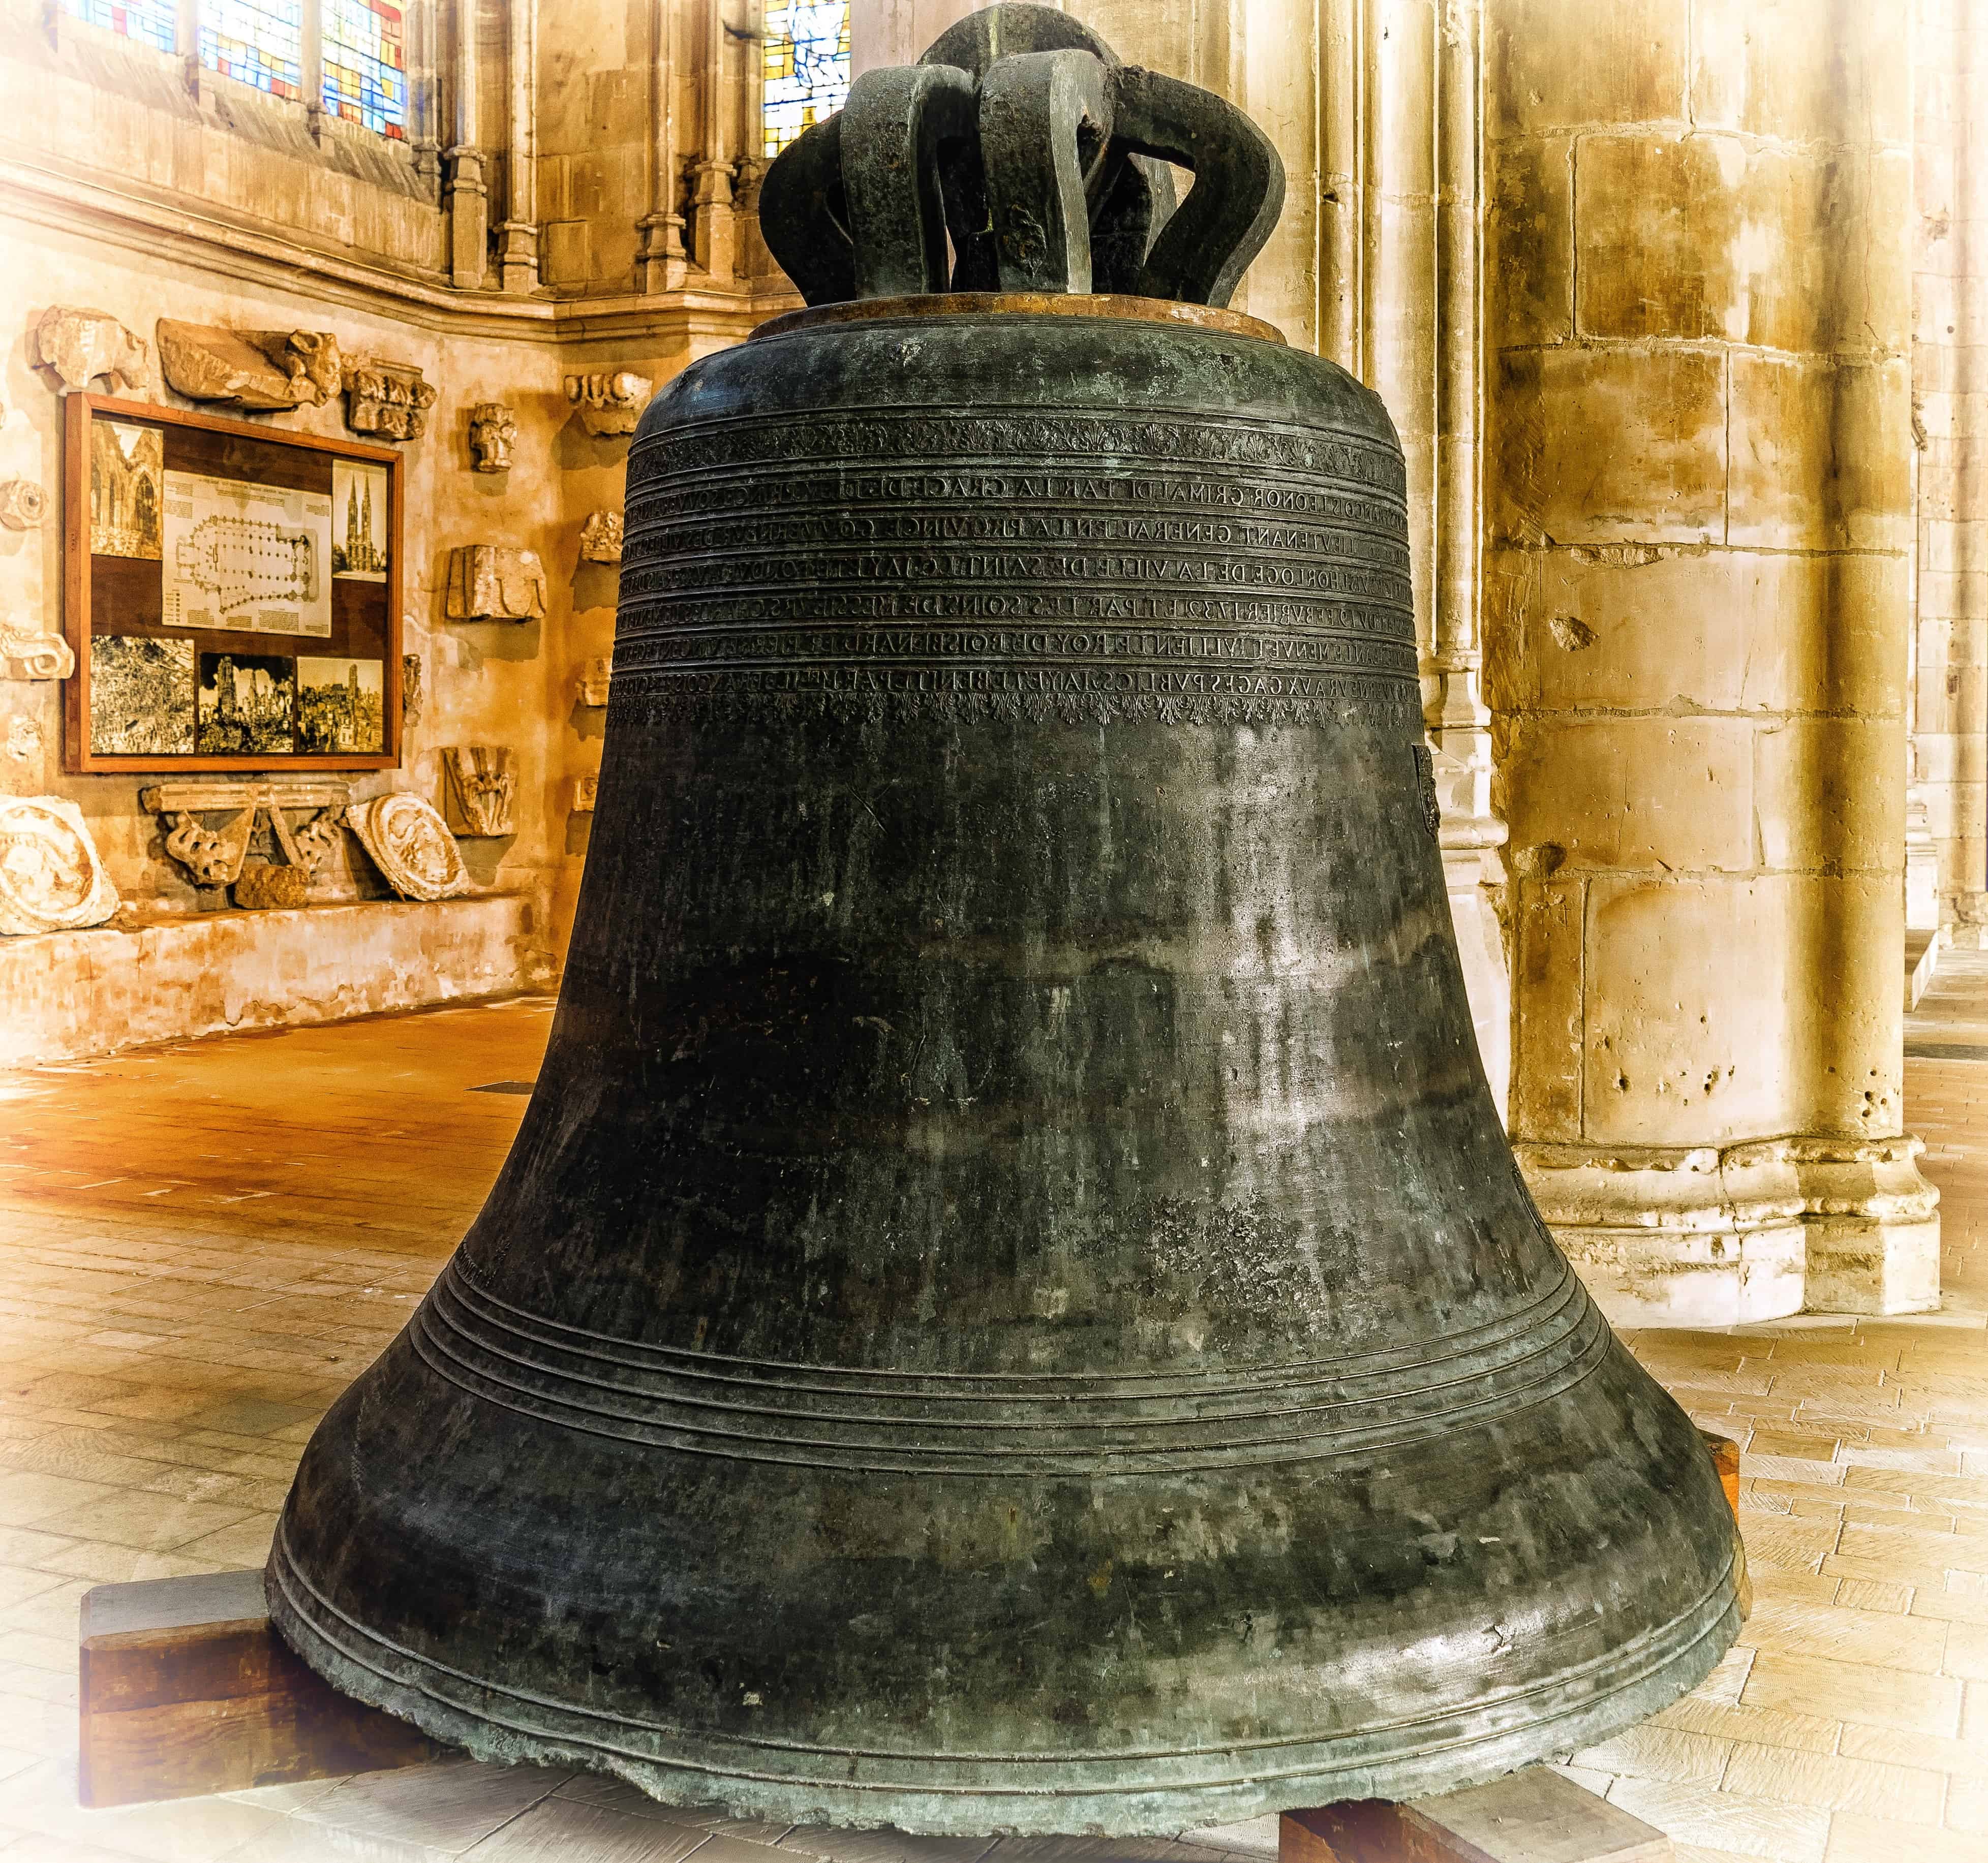 Free picture: retro, religion, ancient, bell, art, old, object, indoor